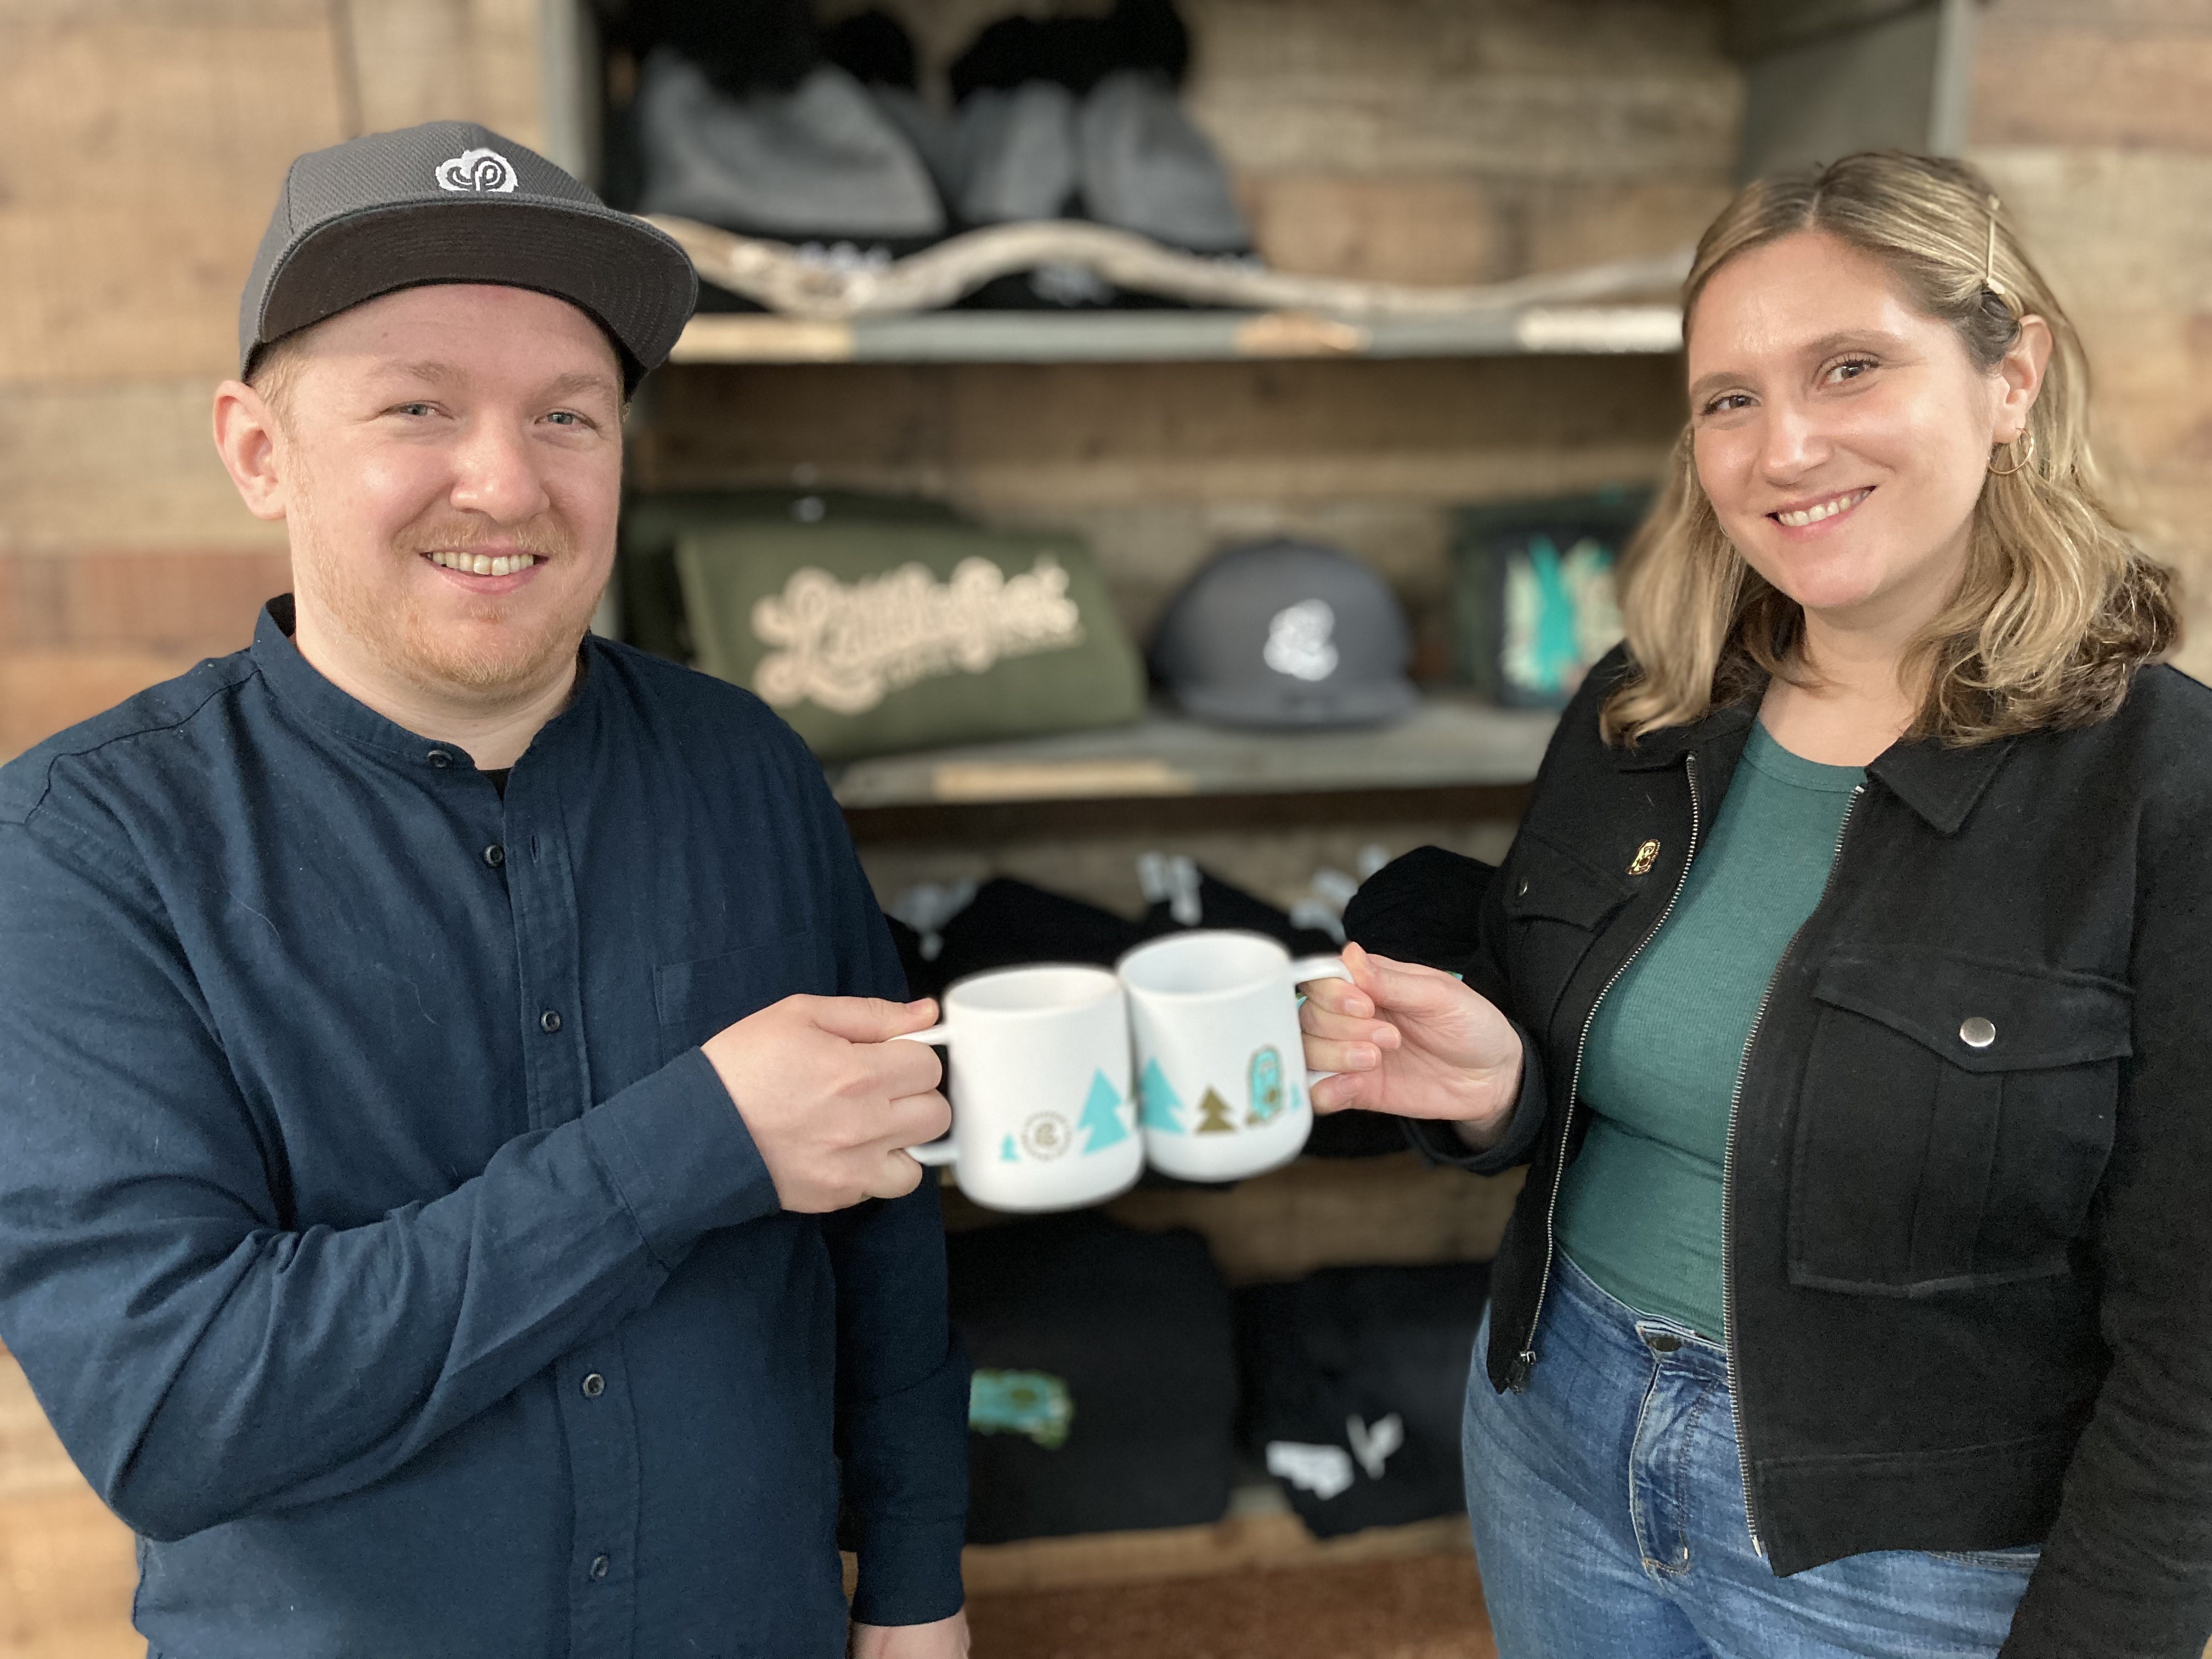 Alex Burbo and Rosie Quasarano, owners of Littlefoot Coffee Roasters.